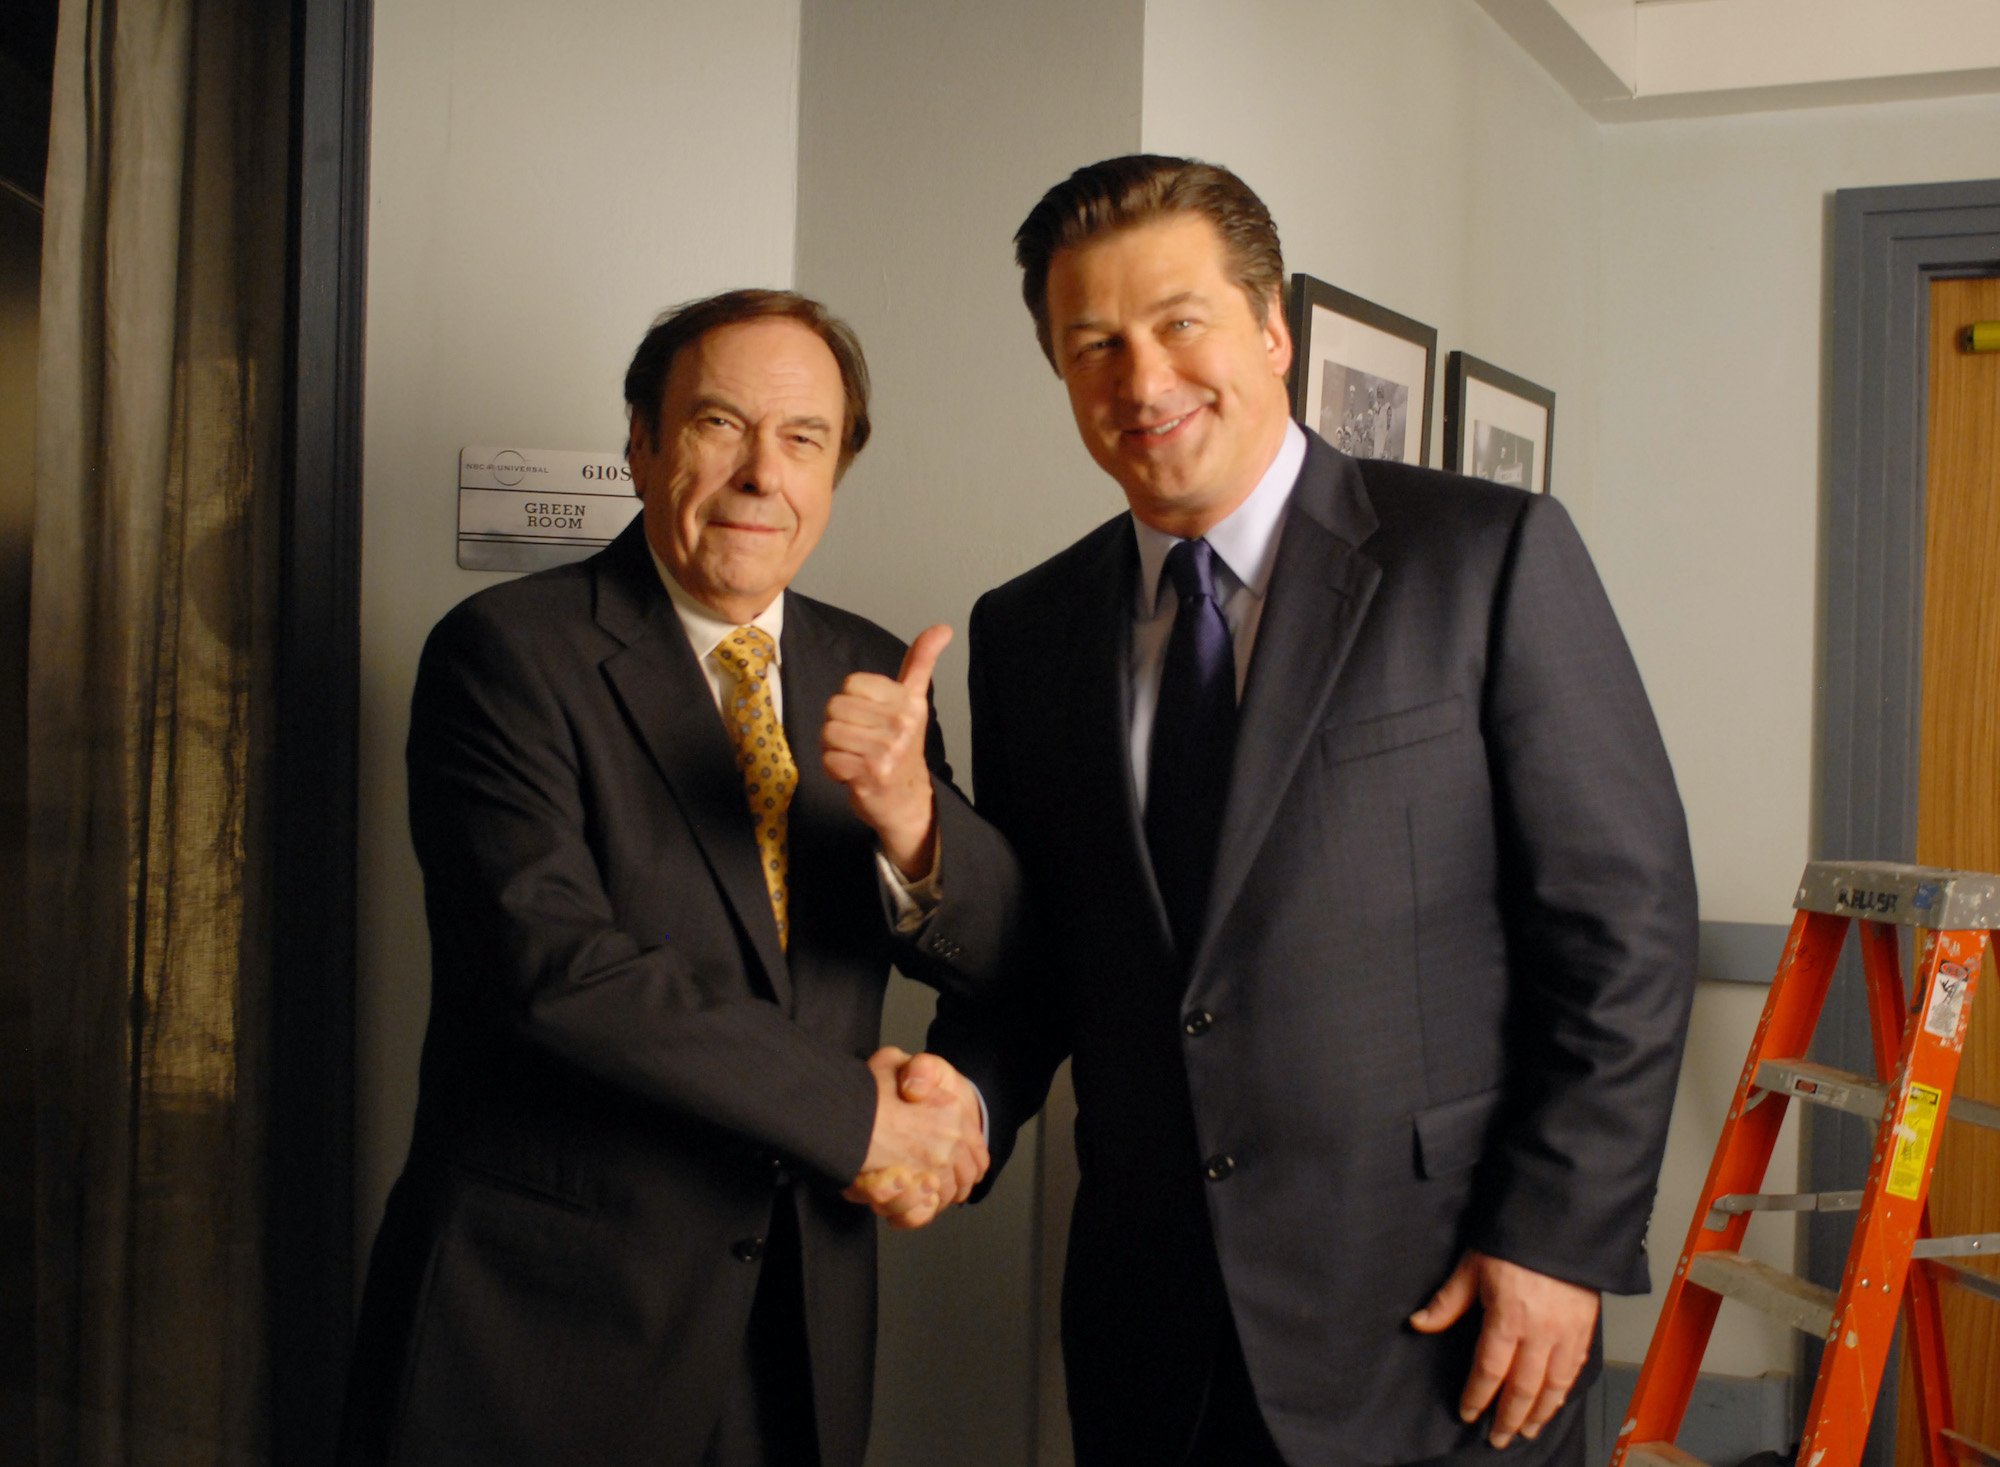 Rip Torn and Alec Baldwin shaking hands, smiling at the camera, on '30 Rock'